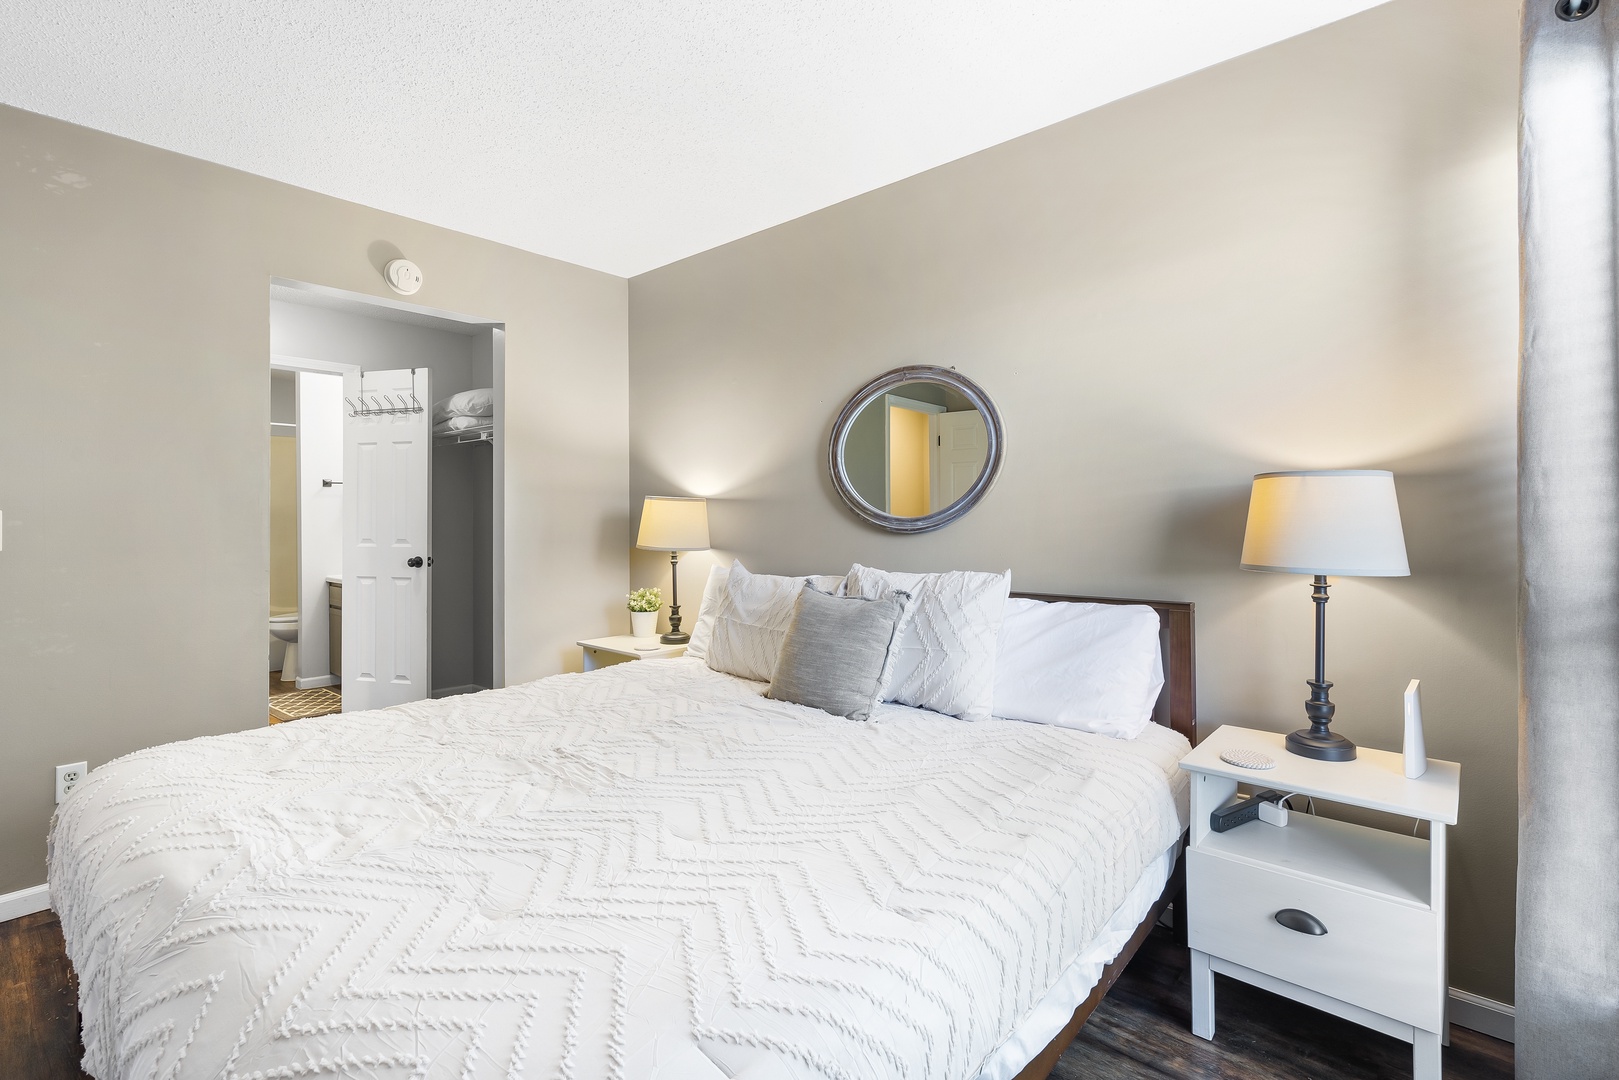 The private suite boasts a plush king-sized bed, ensuite, & TV